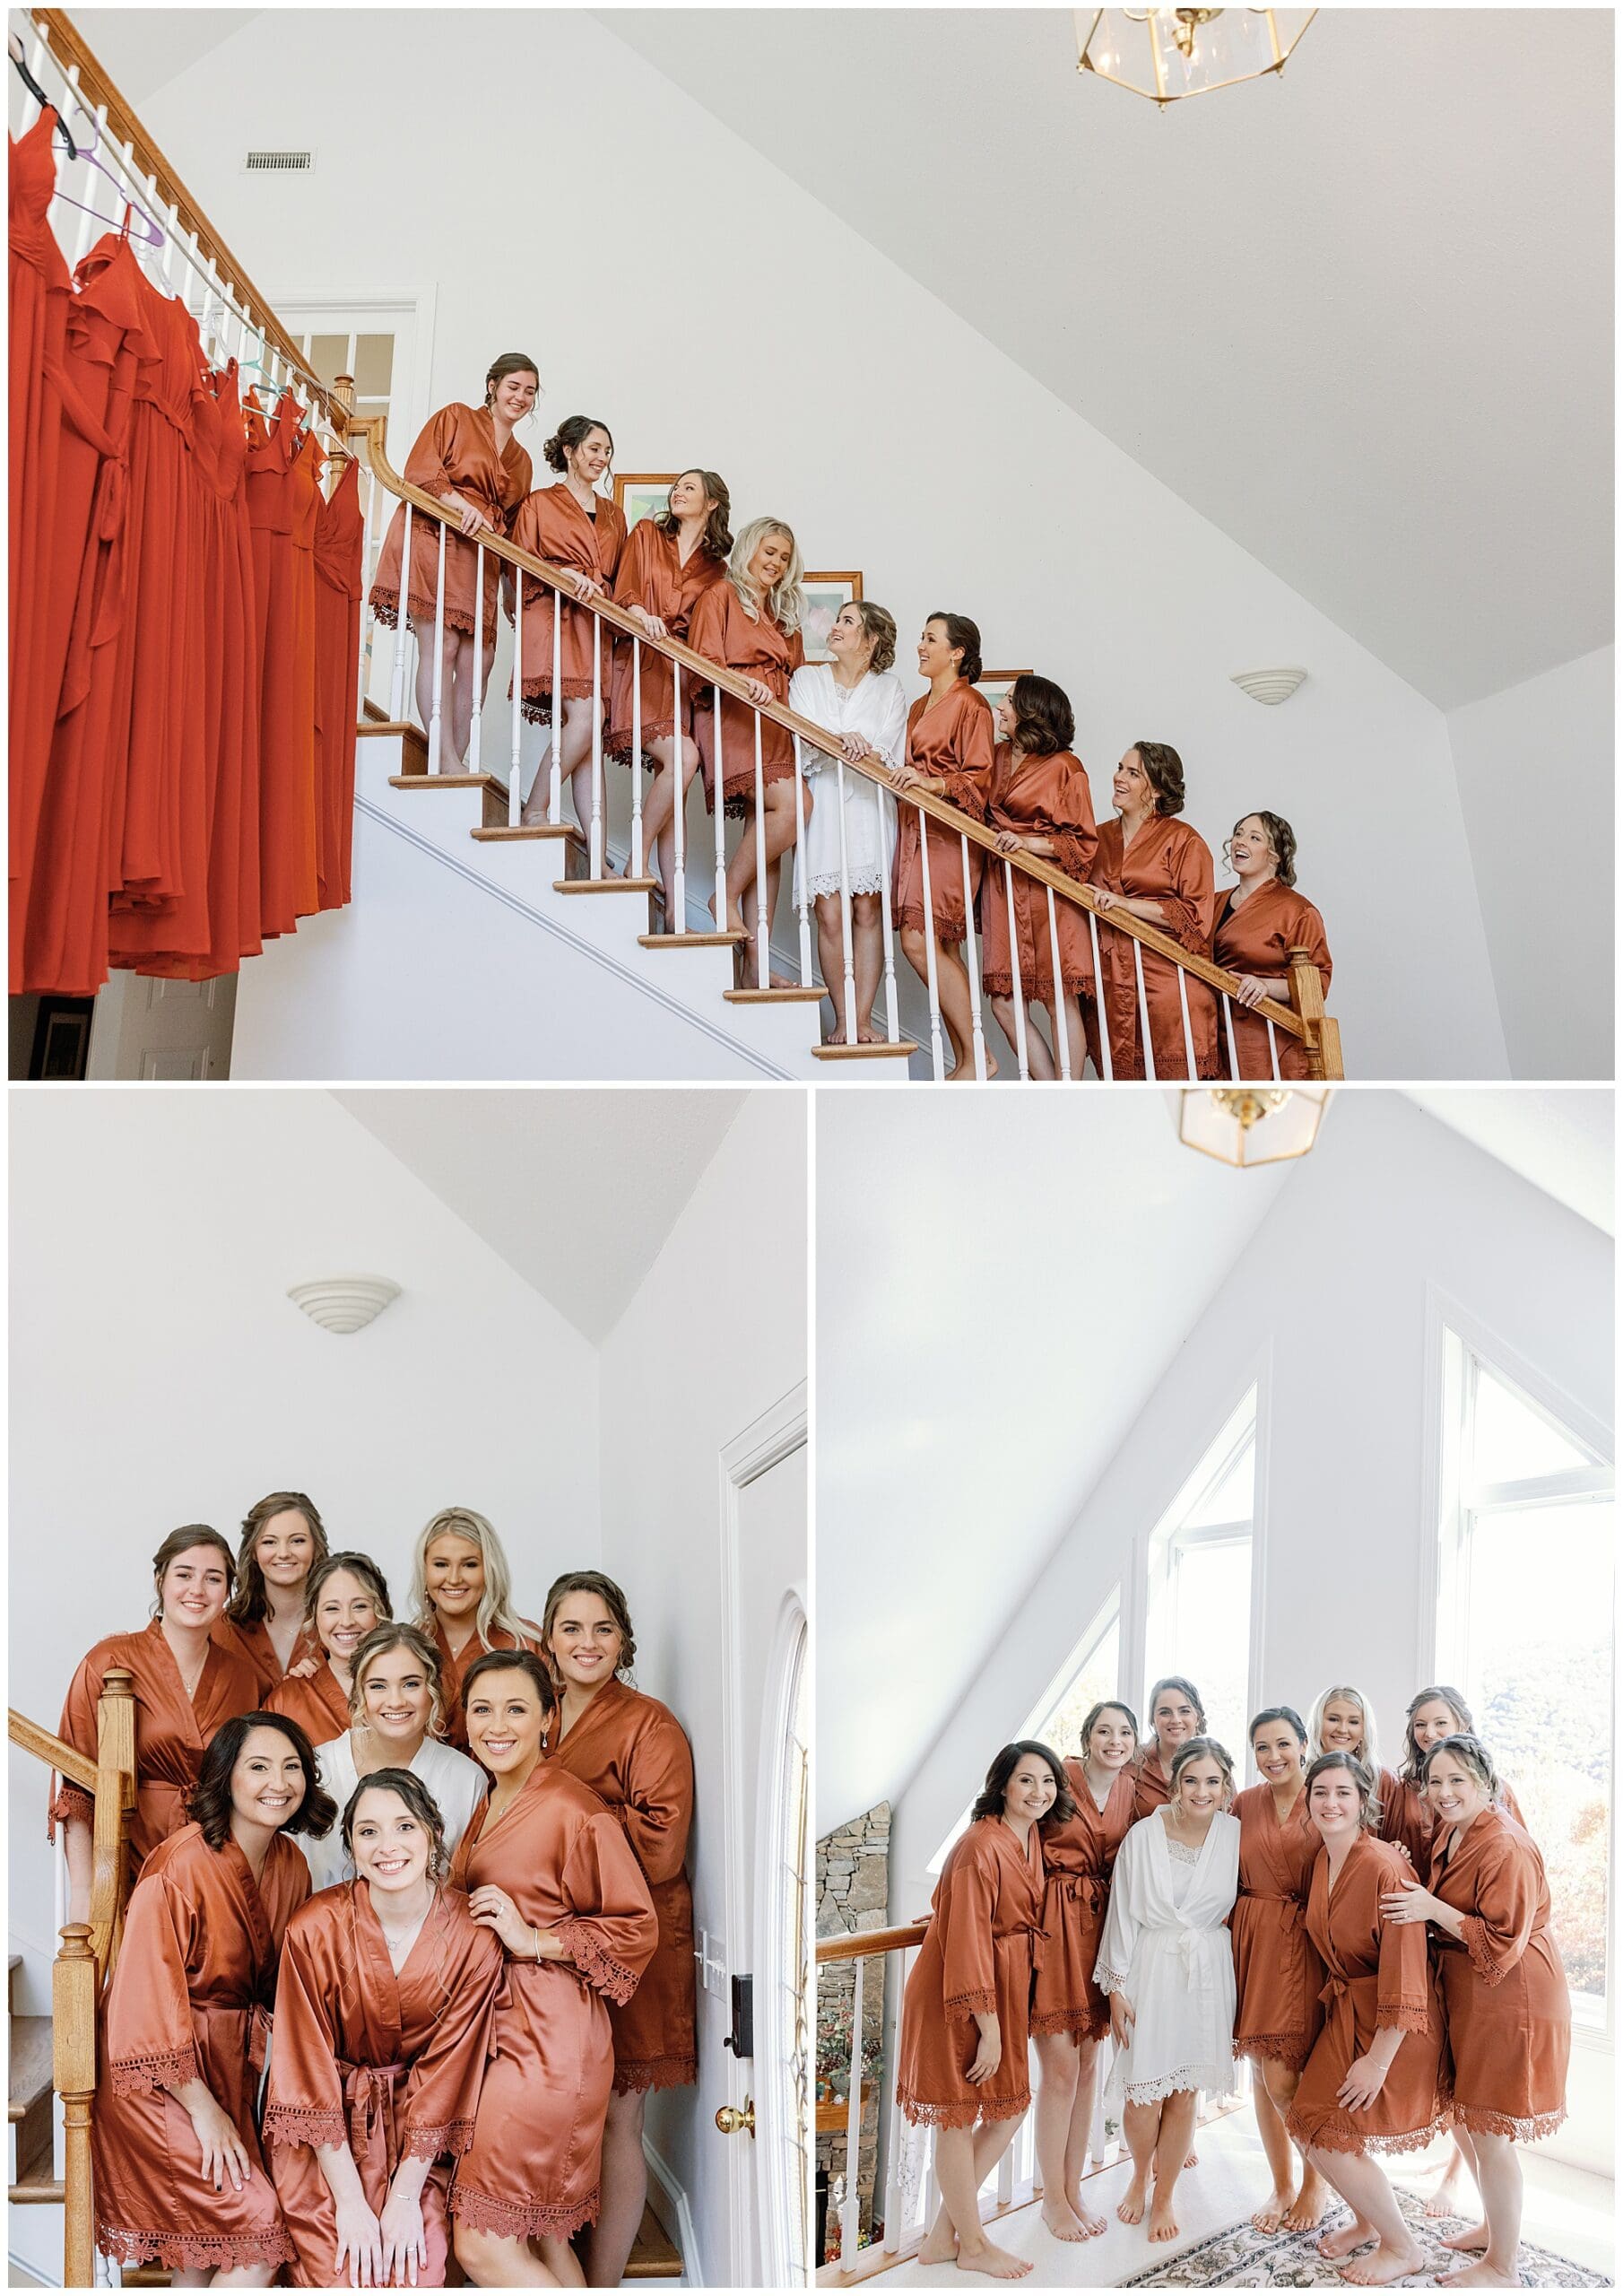 A group of women in matching orange robes pose together in various spots inside a bright home during a bridal preparation session.